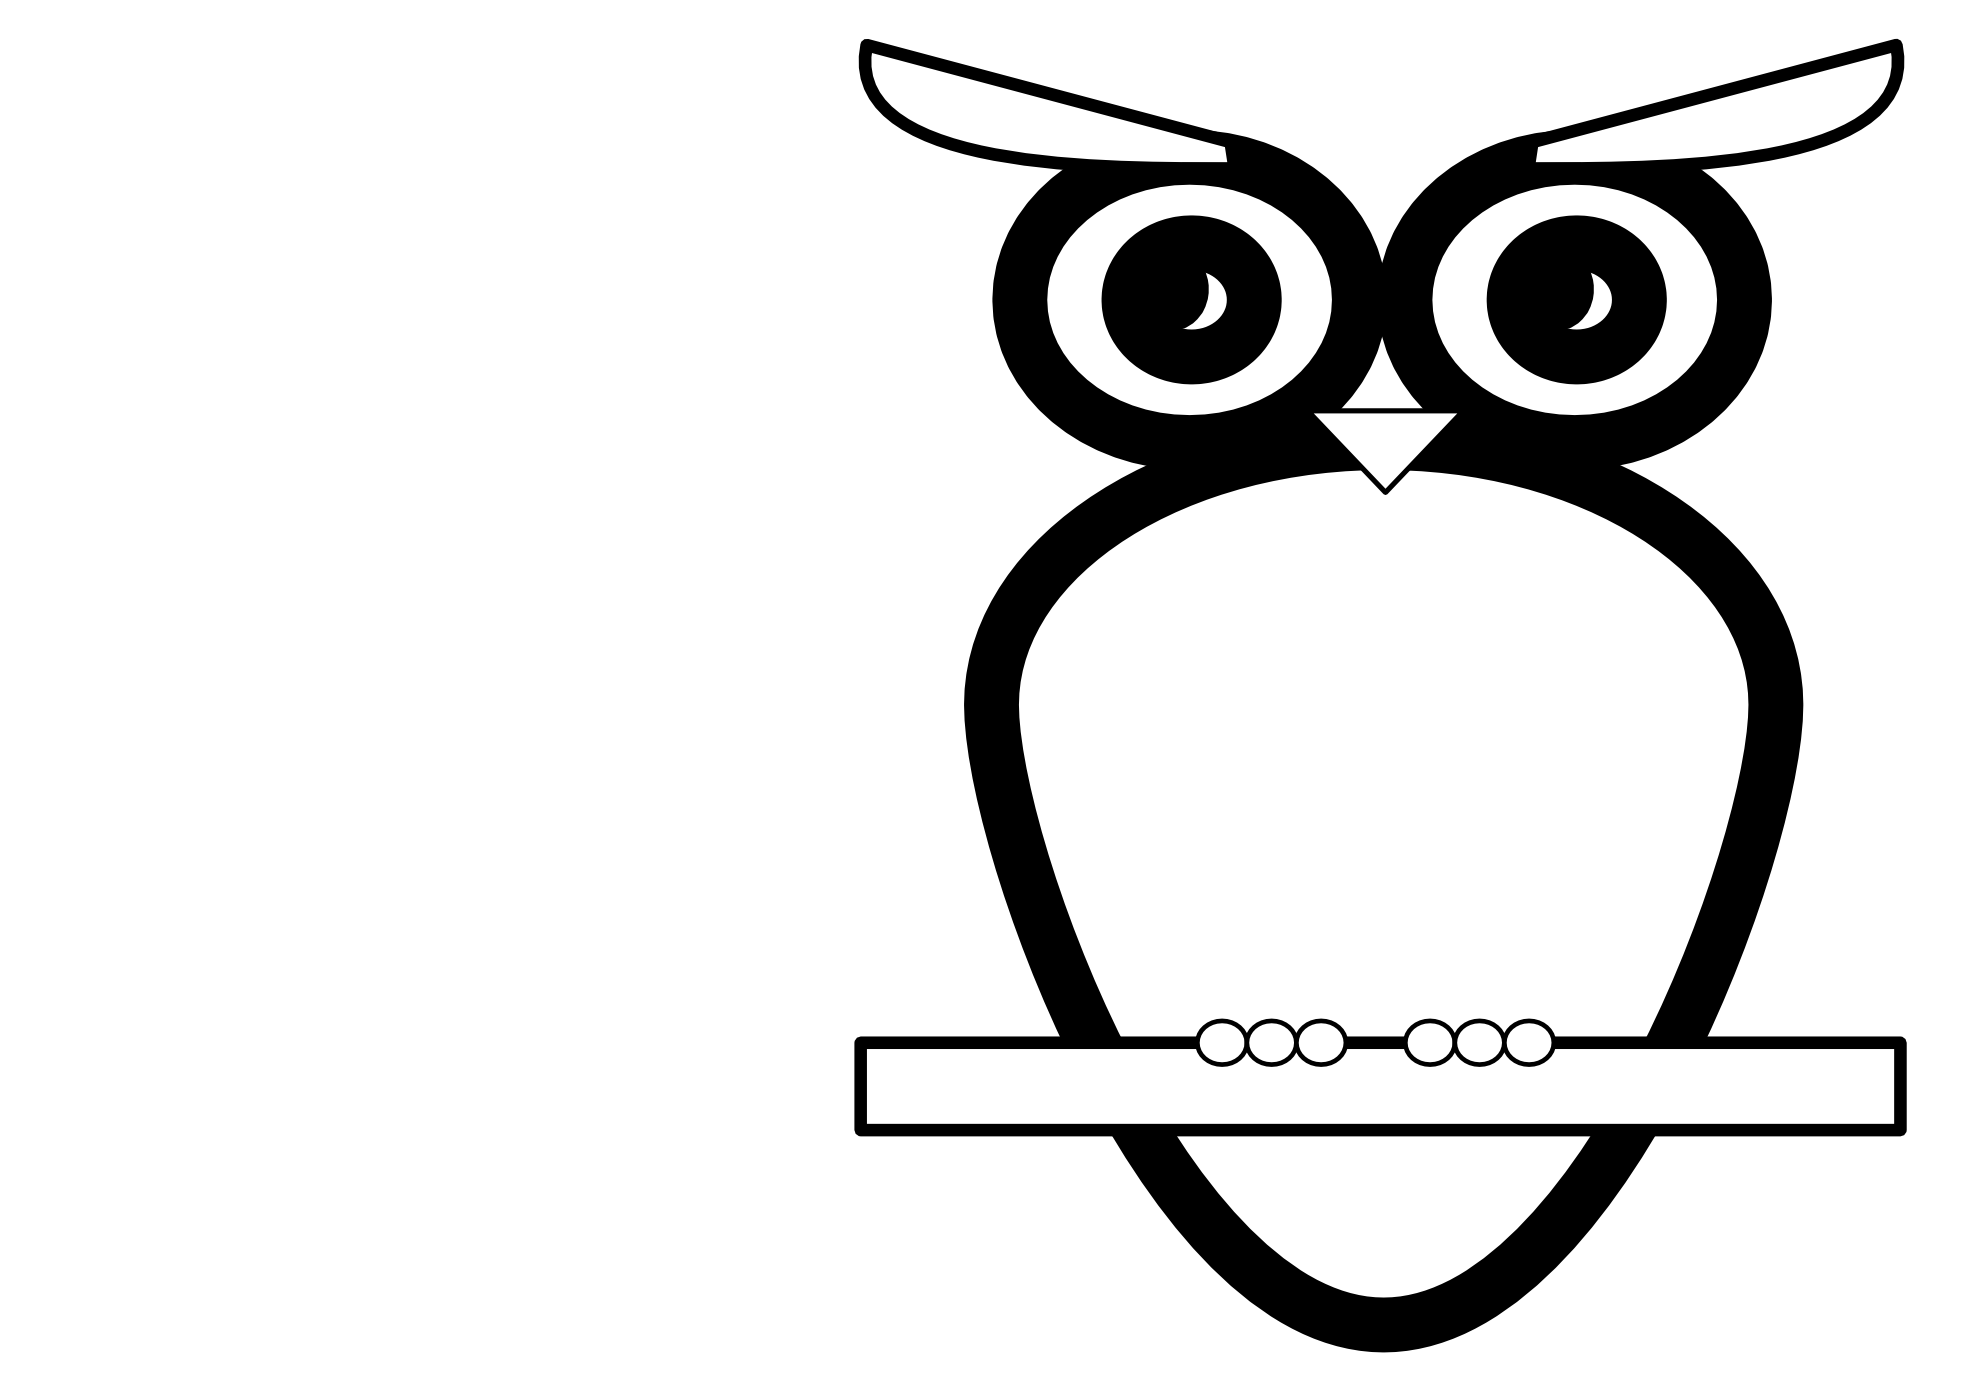 Bw Owl Black White Line Art Scalable Vector Graphics SVG Inkscape ...